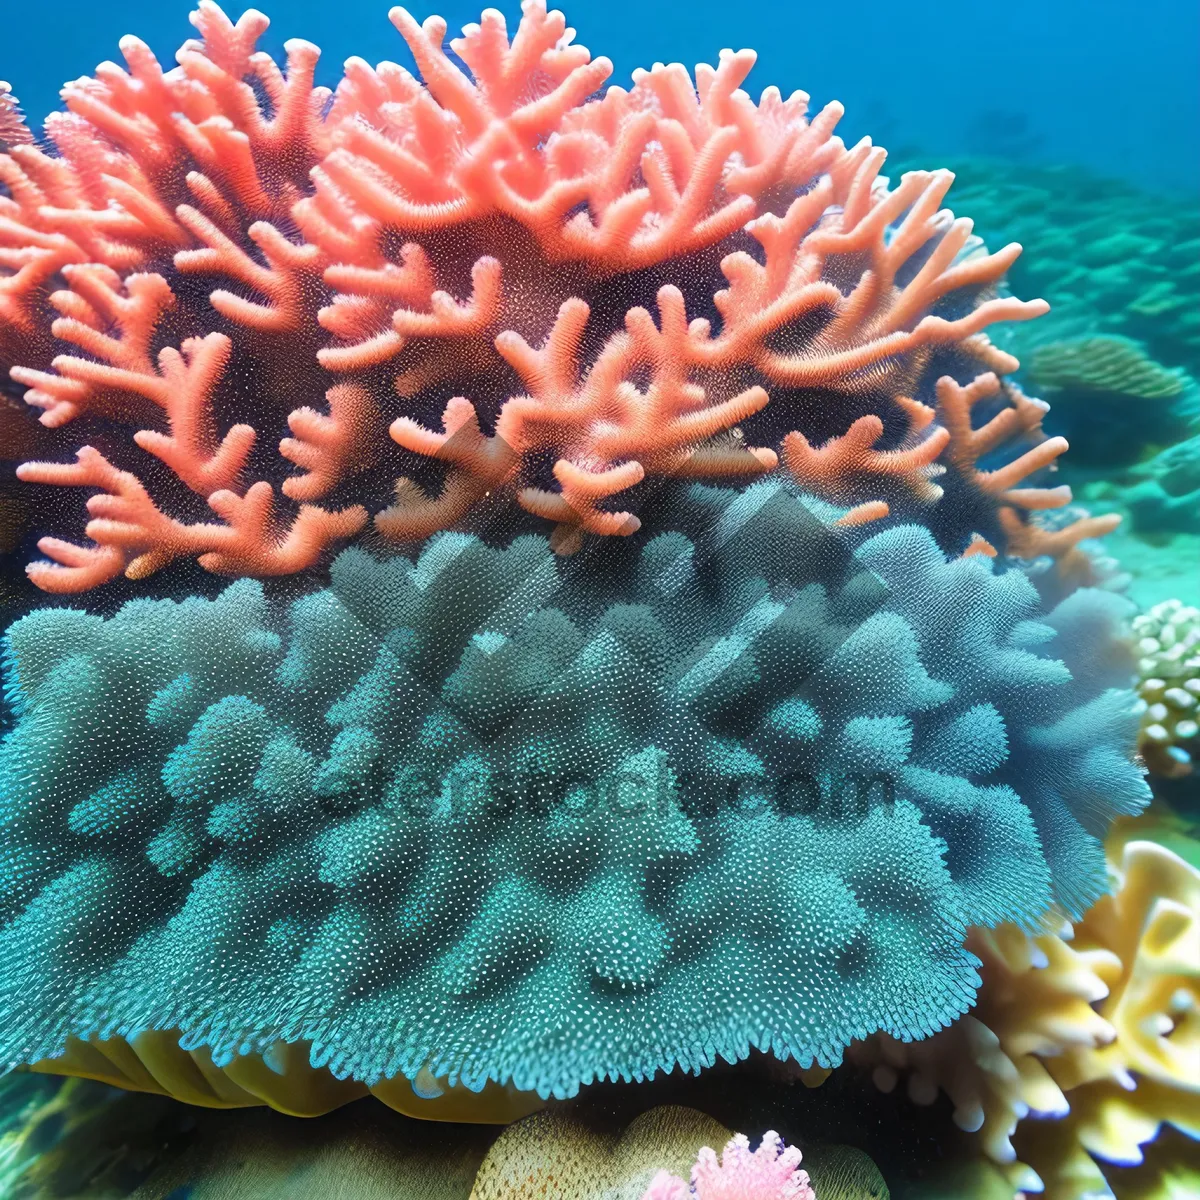 Picture of Vibrant Marine Life in Deep Tropical Coral Reef